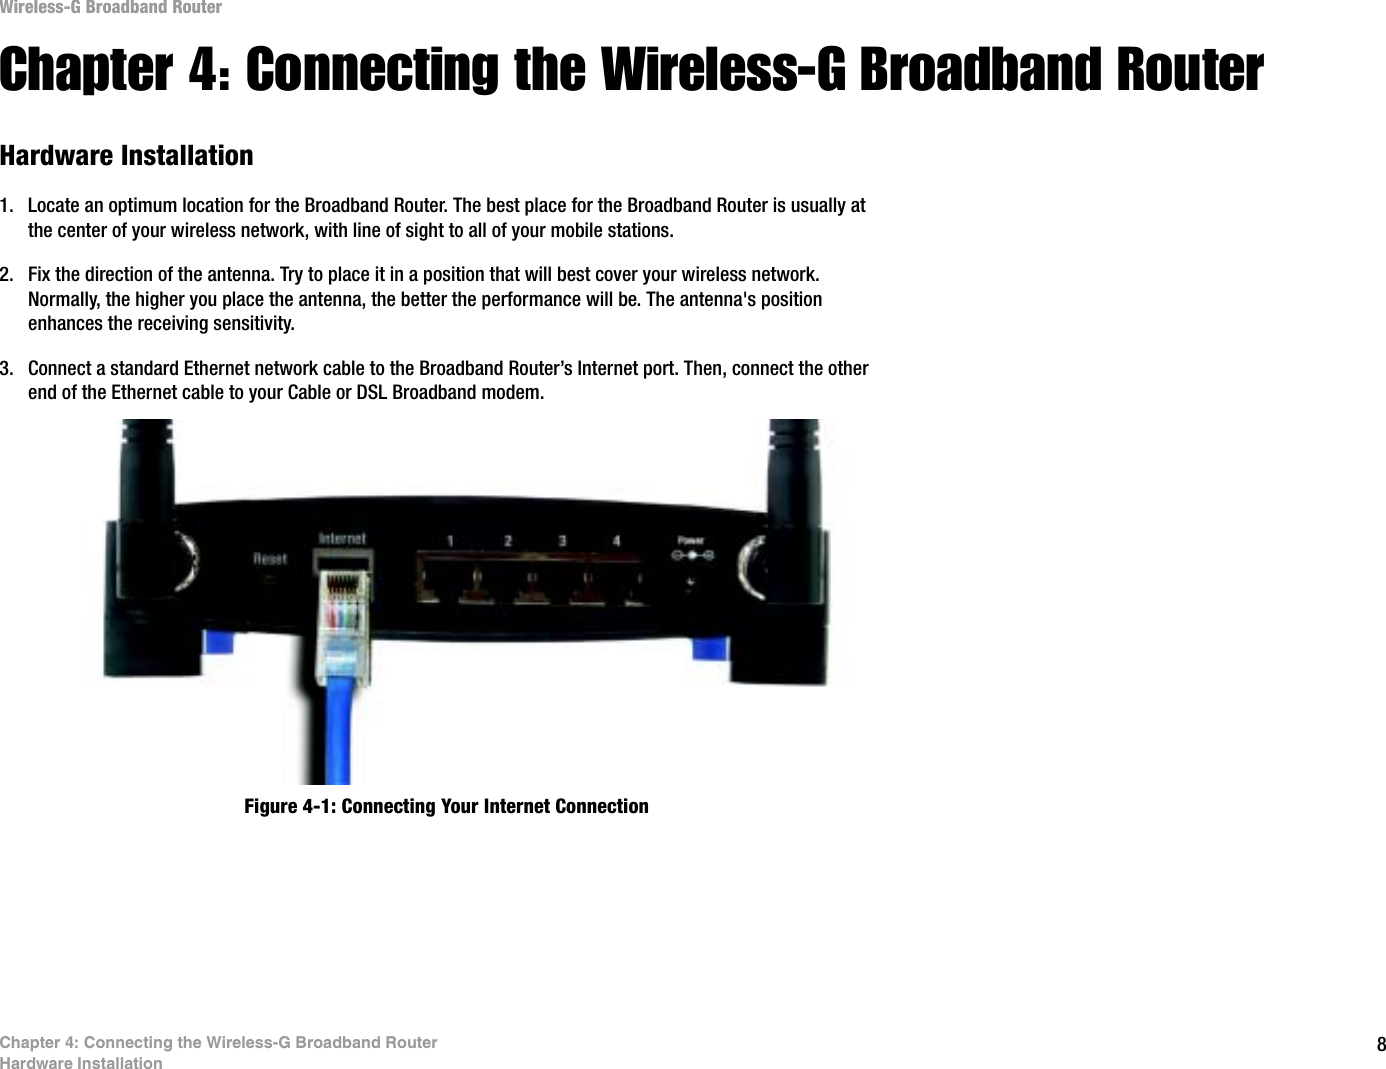 8Chapter 4: Connecting the Wireless-G Broadband RouterHardware InstallationWireless-G Broadband RouterChapter 4: Connecting the Wireless-G Broadband RouterHardware Installation1. Locate an optimum location for the Broadband Router. The best place for the Broadband Router is usually at the center of your wireless network, with line of sight to all of your mobile stations.2. Fix the direction of the antenna. Try to place it in a position that will best cover your wireless network. Normally, the higher you place the antenna, the better the performance will be. The antenna&apos;s position enhances the receiving sensitivity.3. Connect a standard Ethernet network cable to the Broadband Router’s Internet port. Then, connect the other end of the Ethernet cable to your Cable or DSL Broadband modem.Figure 4-1: Connecting Your Internet Connection